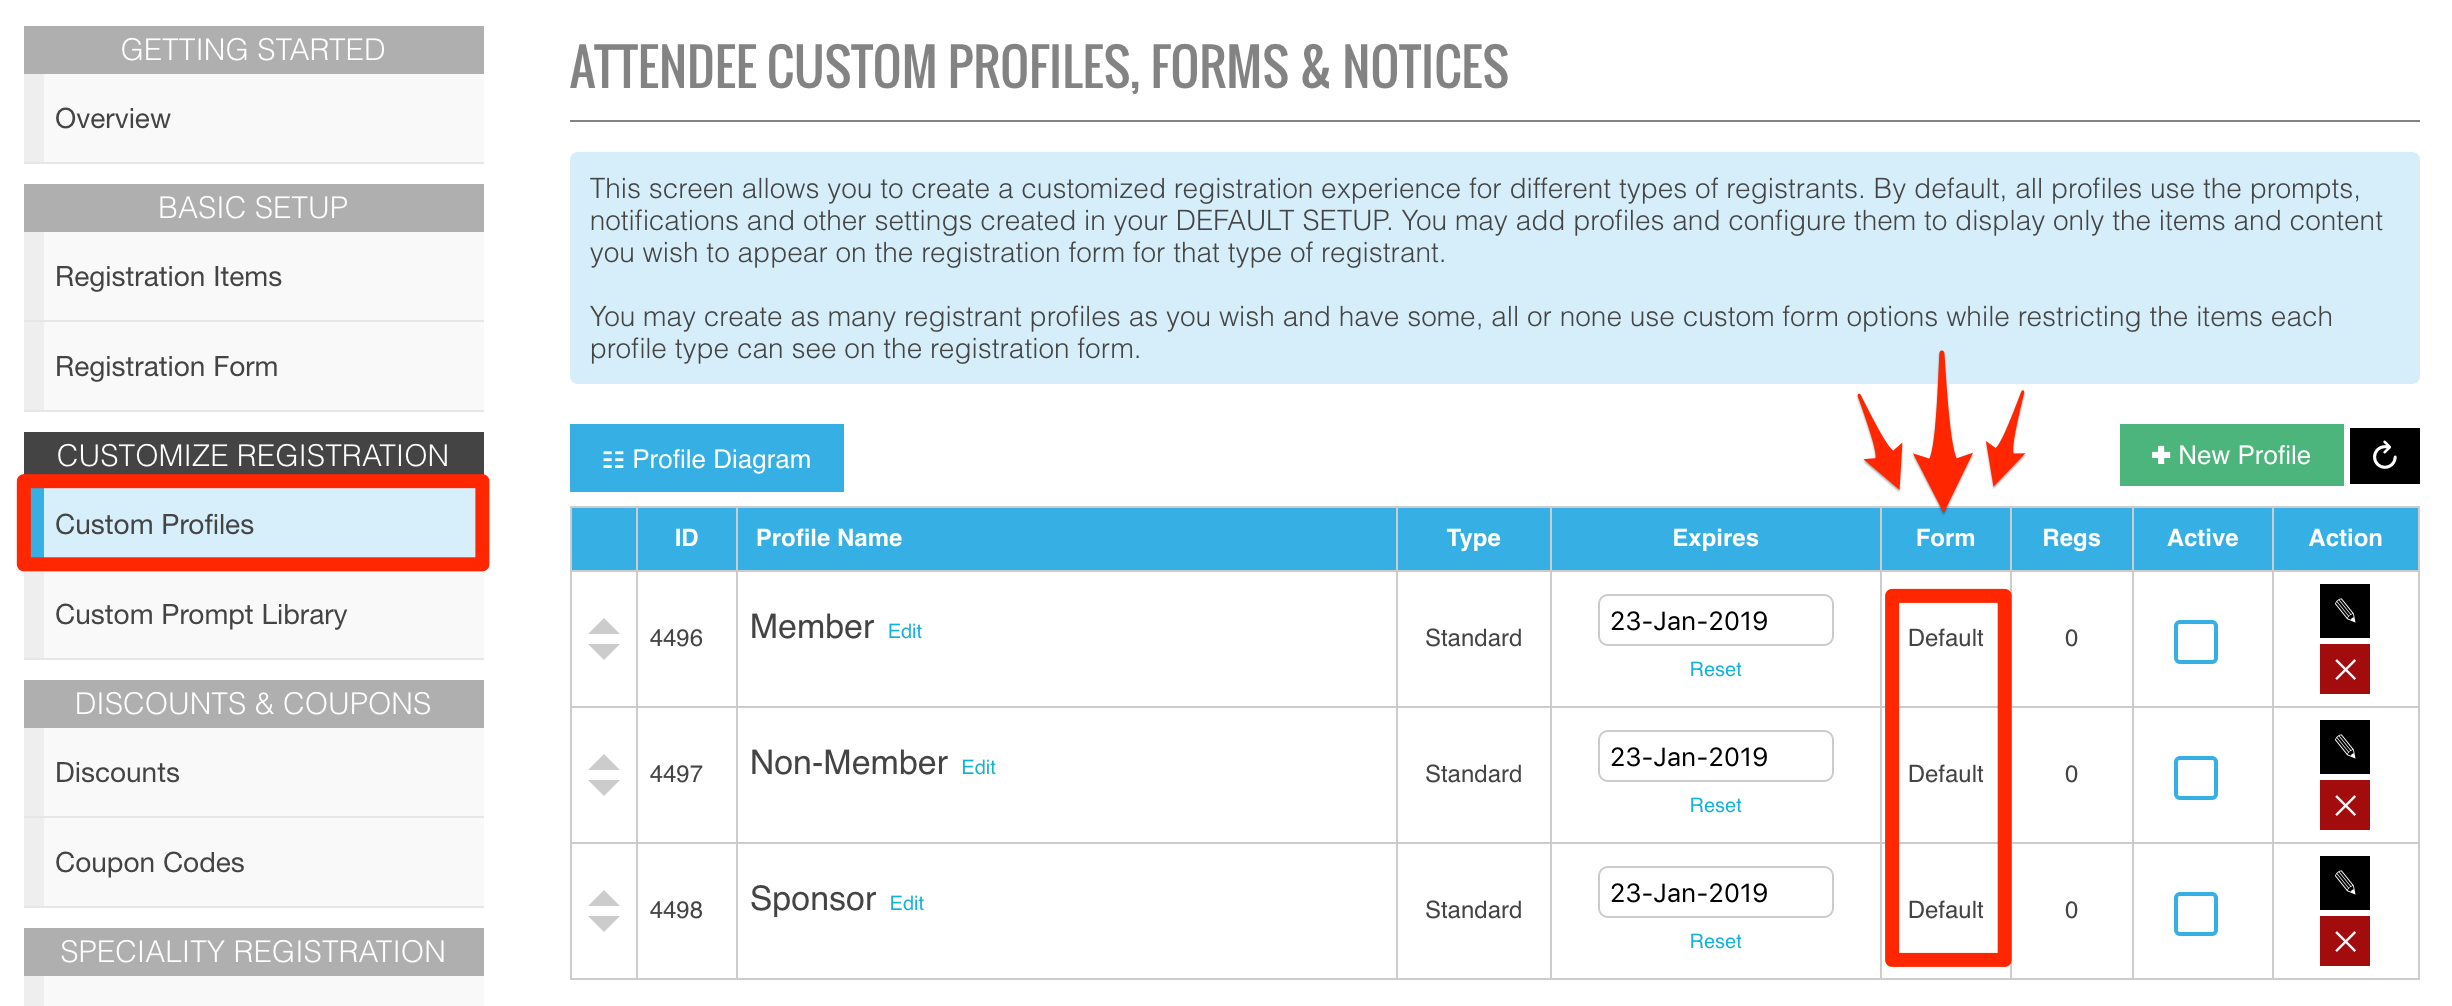 Custom_Profiles_and_Default_Form.png